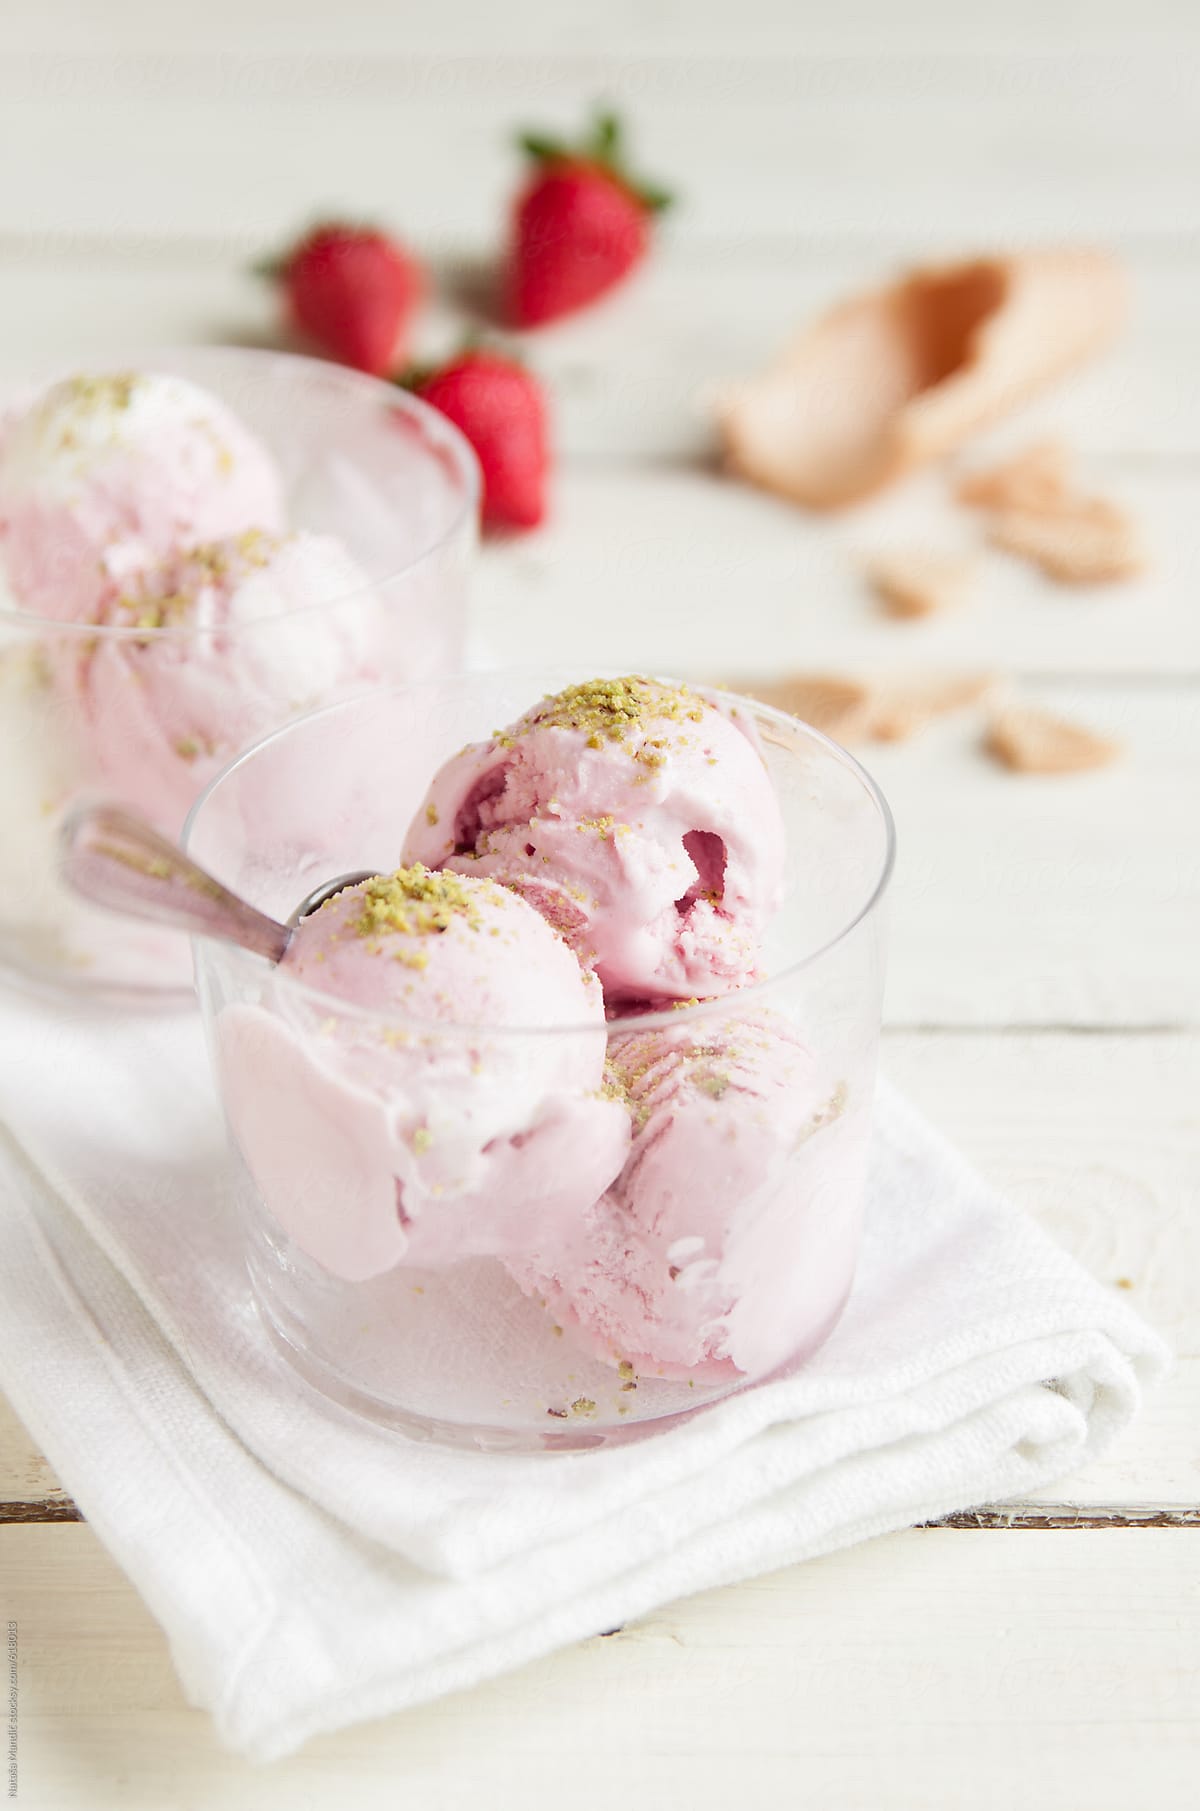 Strawberry icecream with pistachio topping